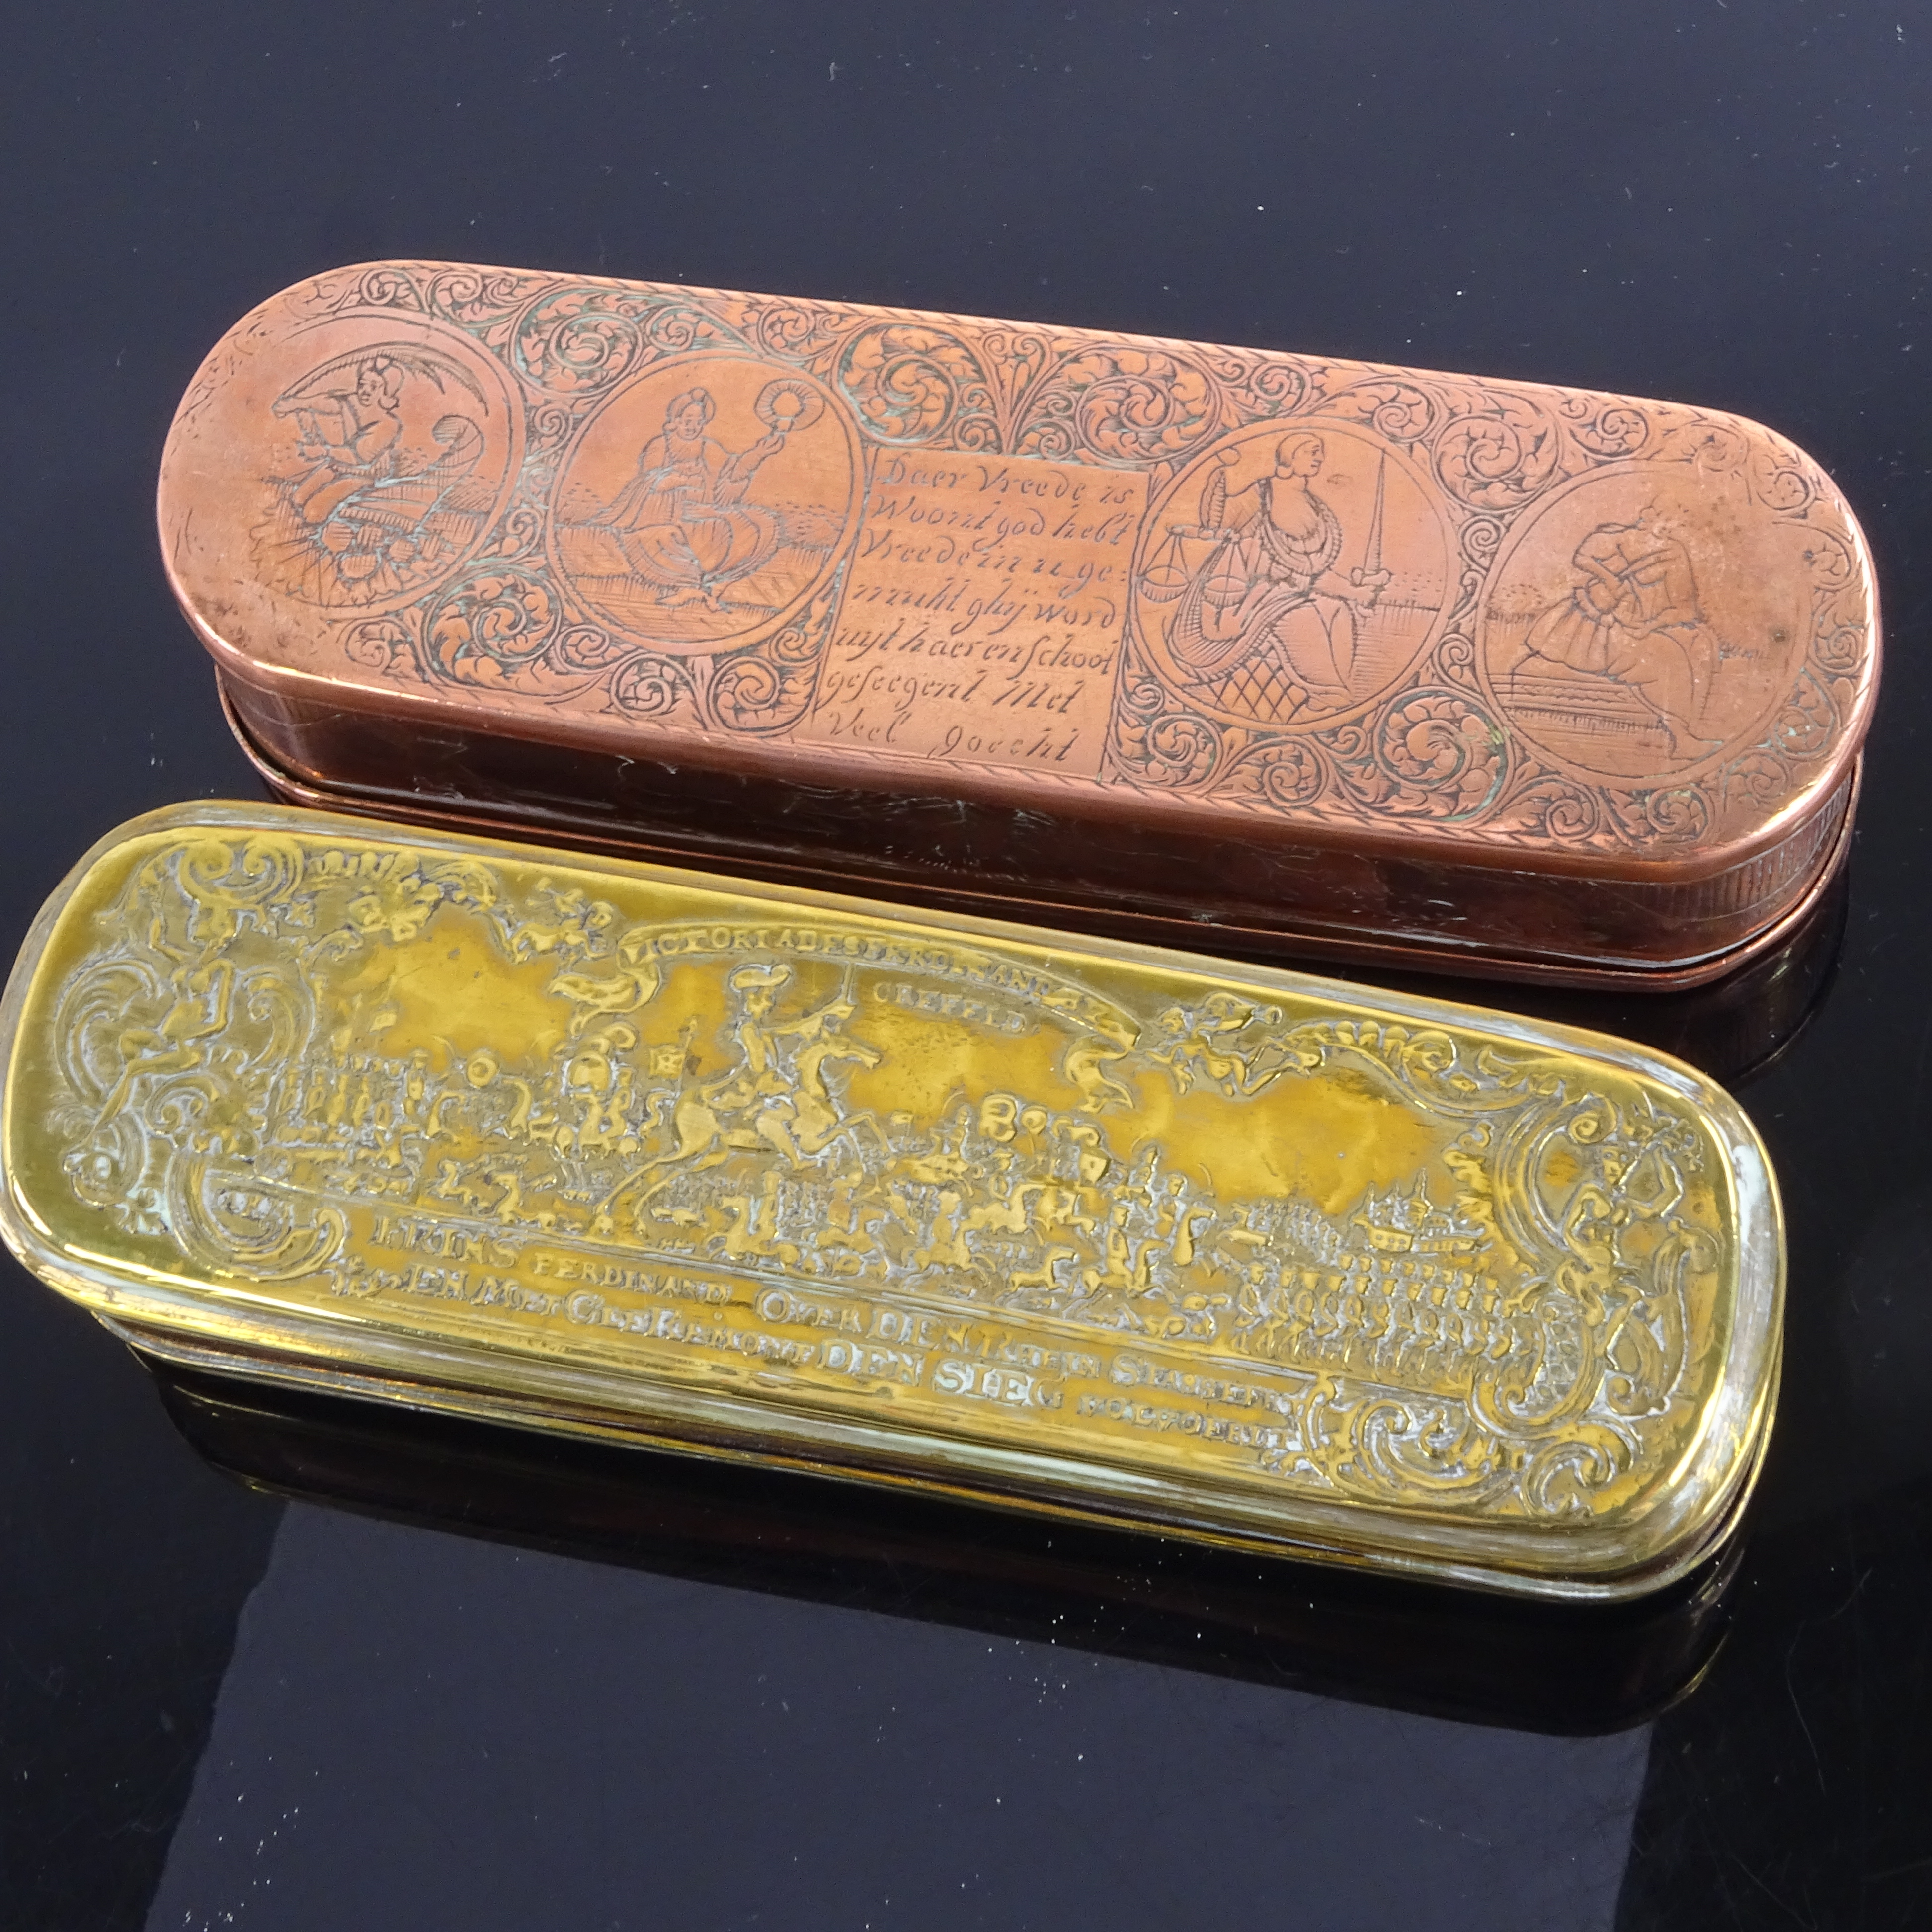 2 ornate 18th century Dutch brass and copper tobacco boxes, 1 depicting Prince Ferdinand at the - Image 2 of 3